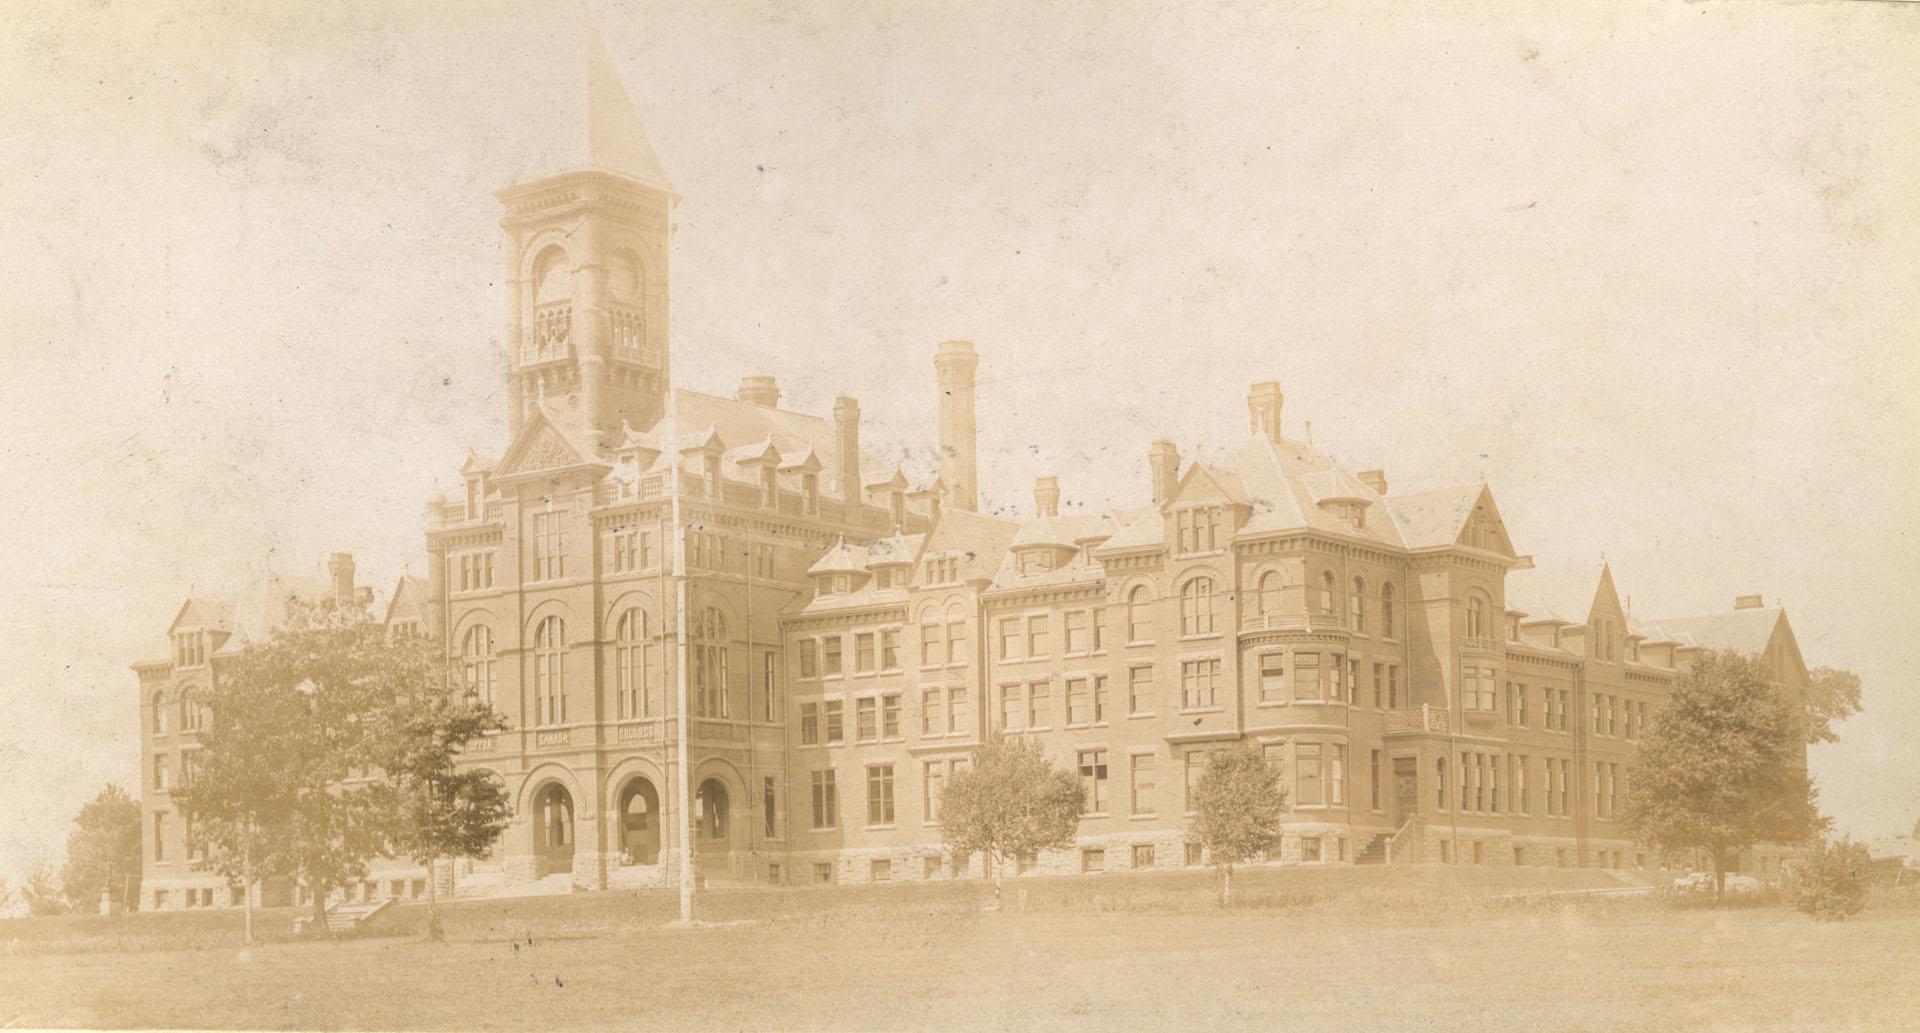 Upper Canada College (opened 1891), Lonsdale Road